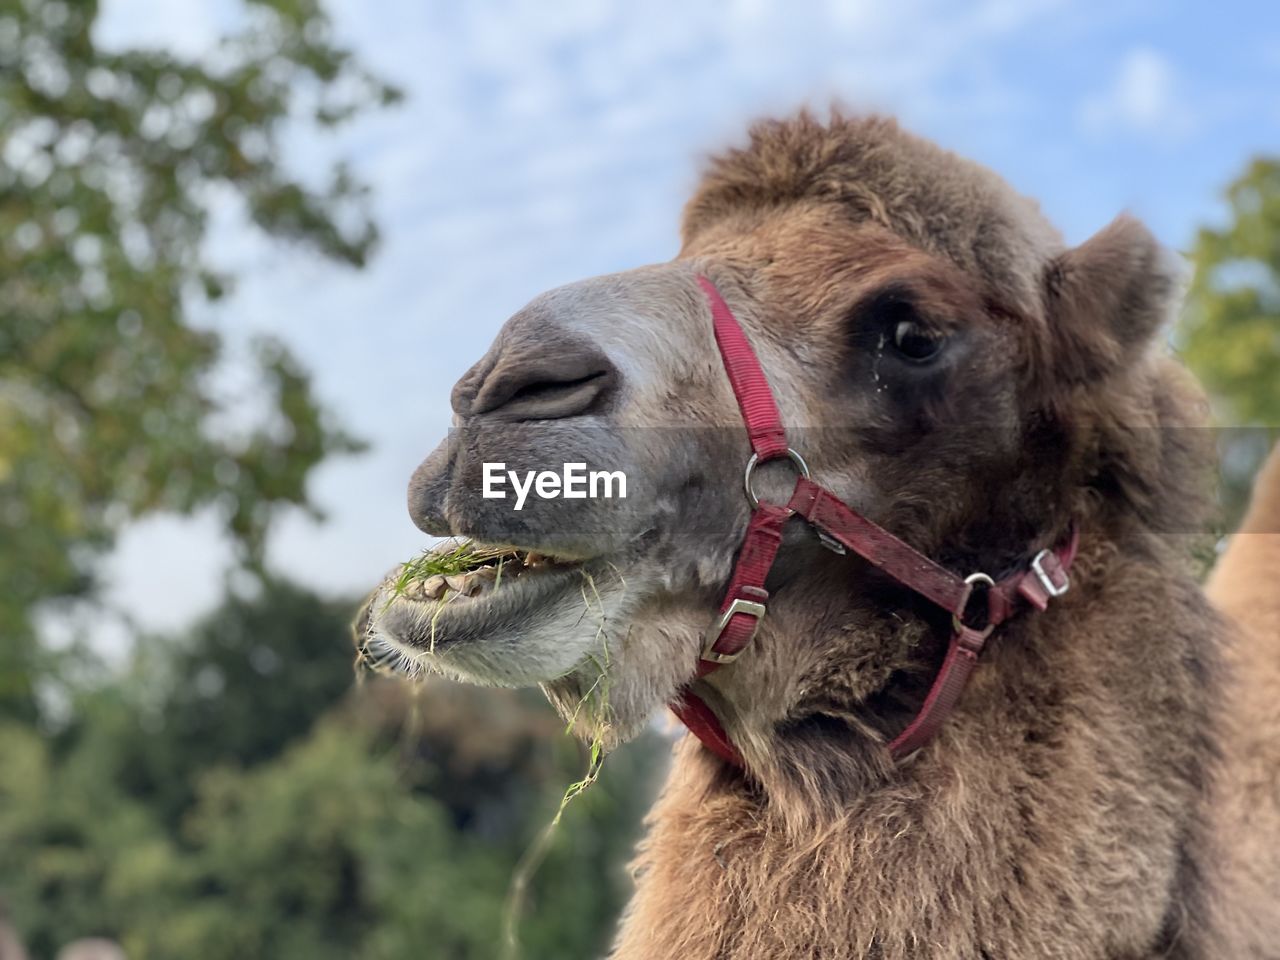 camel, animal themes, animal, mammal, one animal, arabian camel, domestic animals, animal body part, pet, animal head, close-up, focus on foreground, no people, portrait, working animal, livestock, nature, day, outdoors, sky, animal wildlife, plant, bridle, agriculture, brown, llama